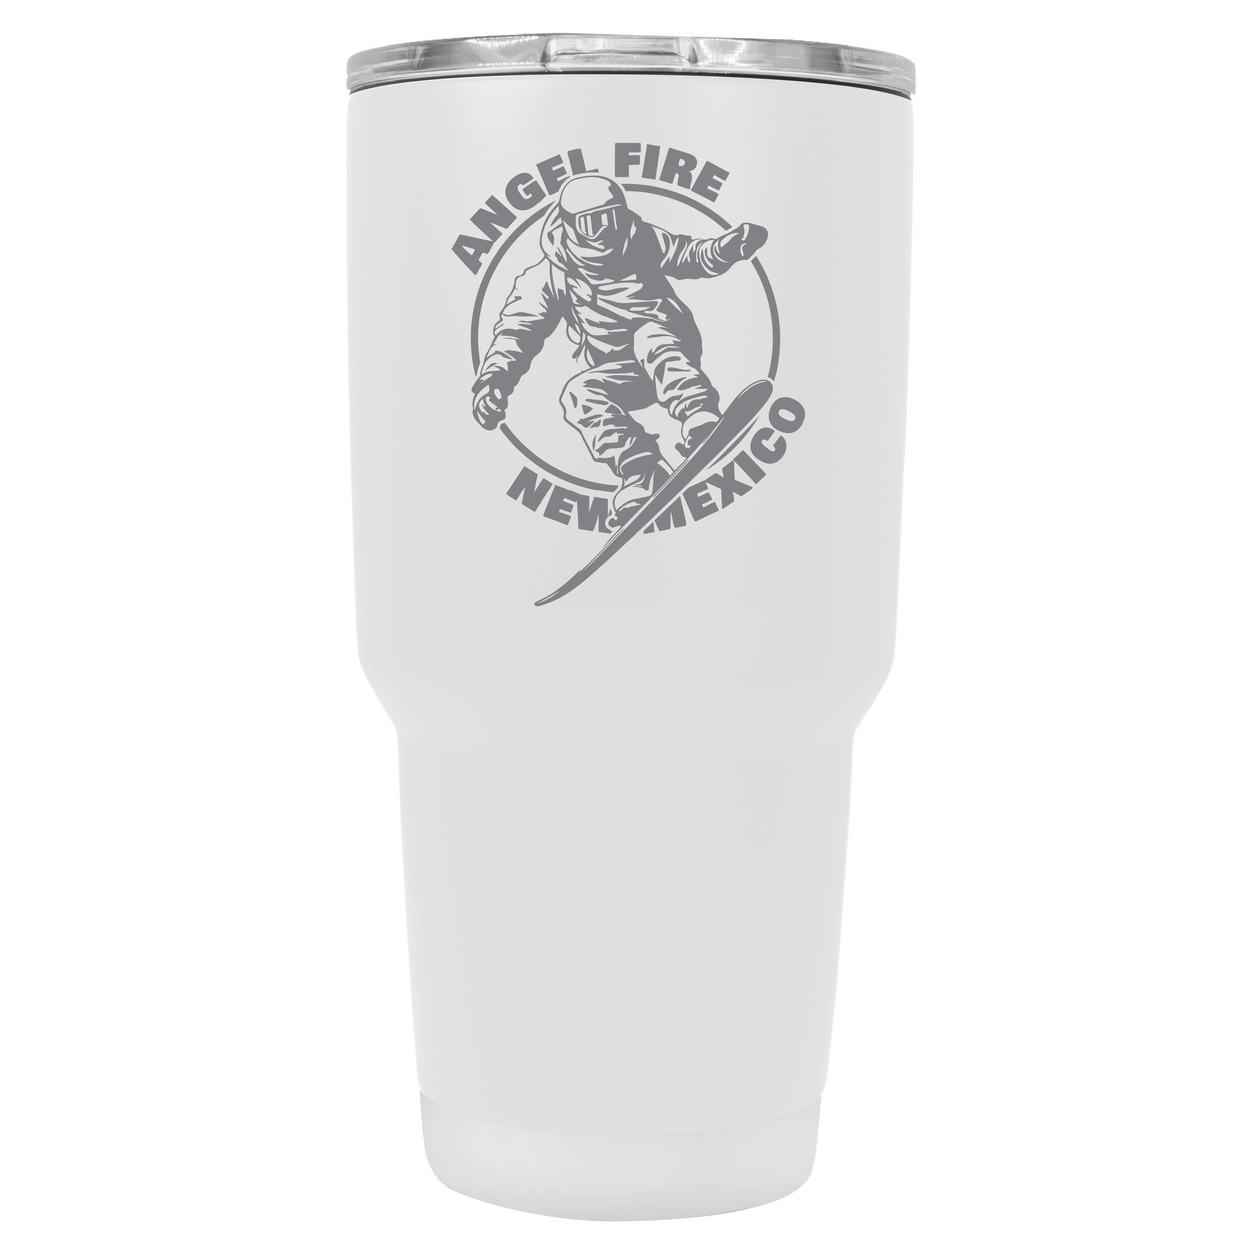 Angel Fire New Mexico Souvenir 24 Oz Engraved Insulated Stainless Steel Tumbler - Green,,4-Pack